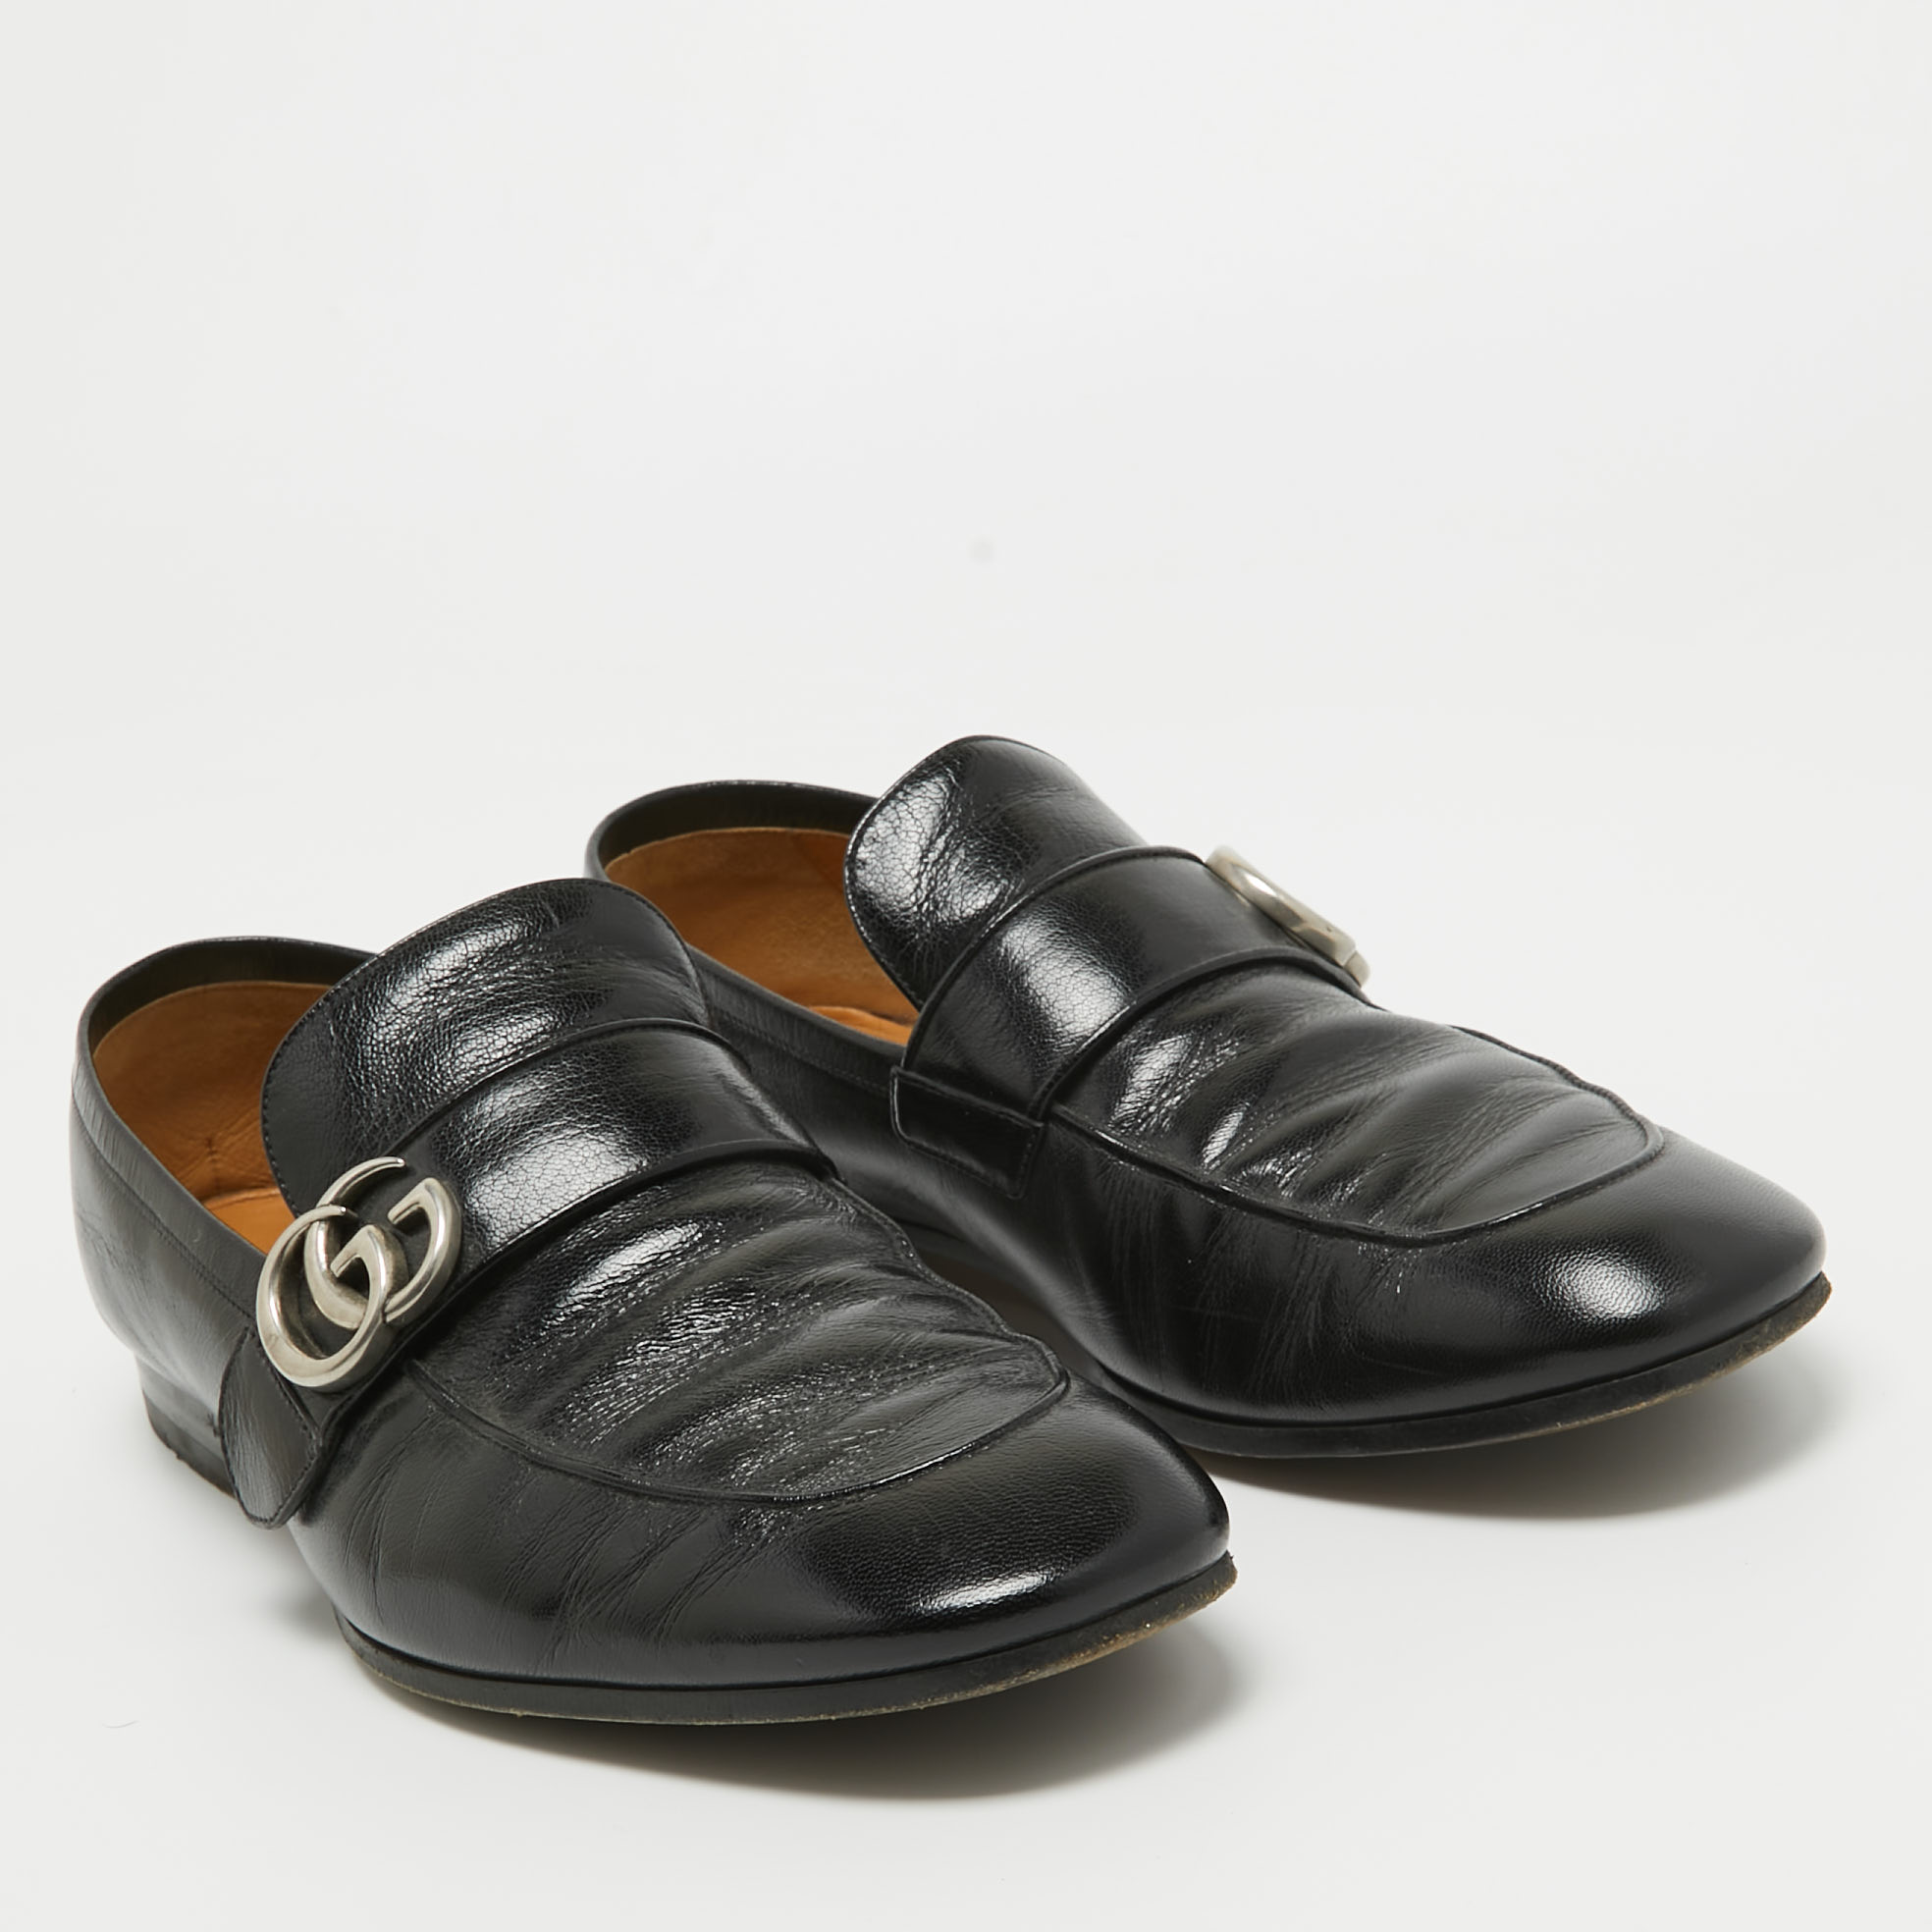 Gucci Black Leather GG Marmont Slip On Loafers Size 43